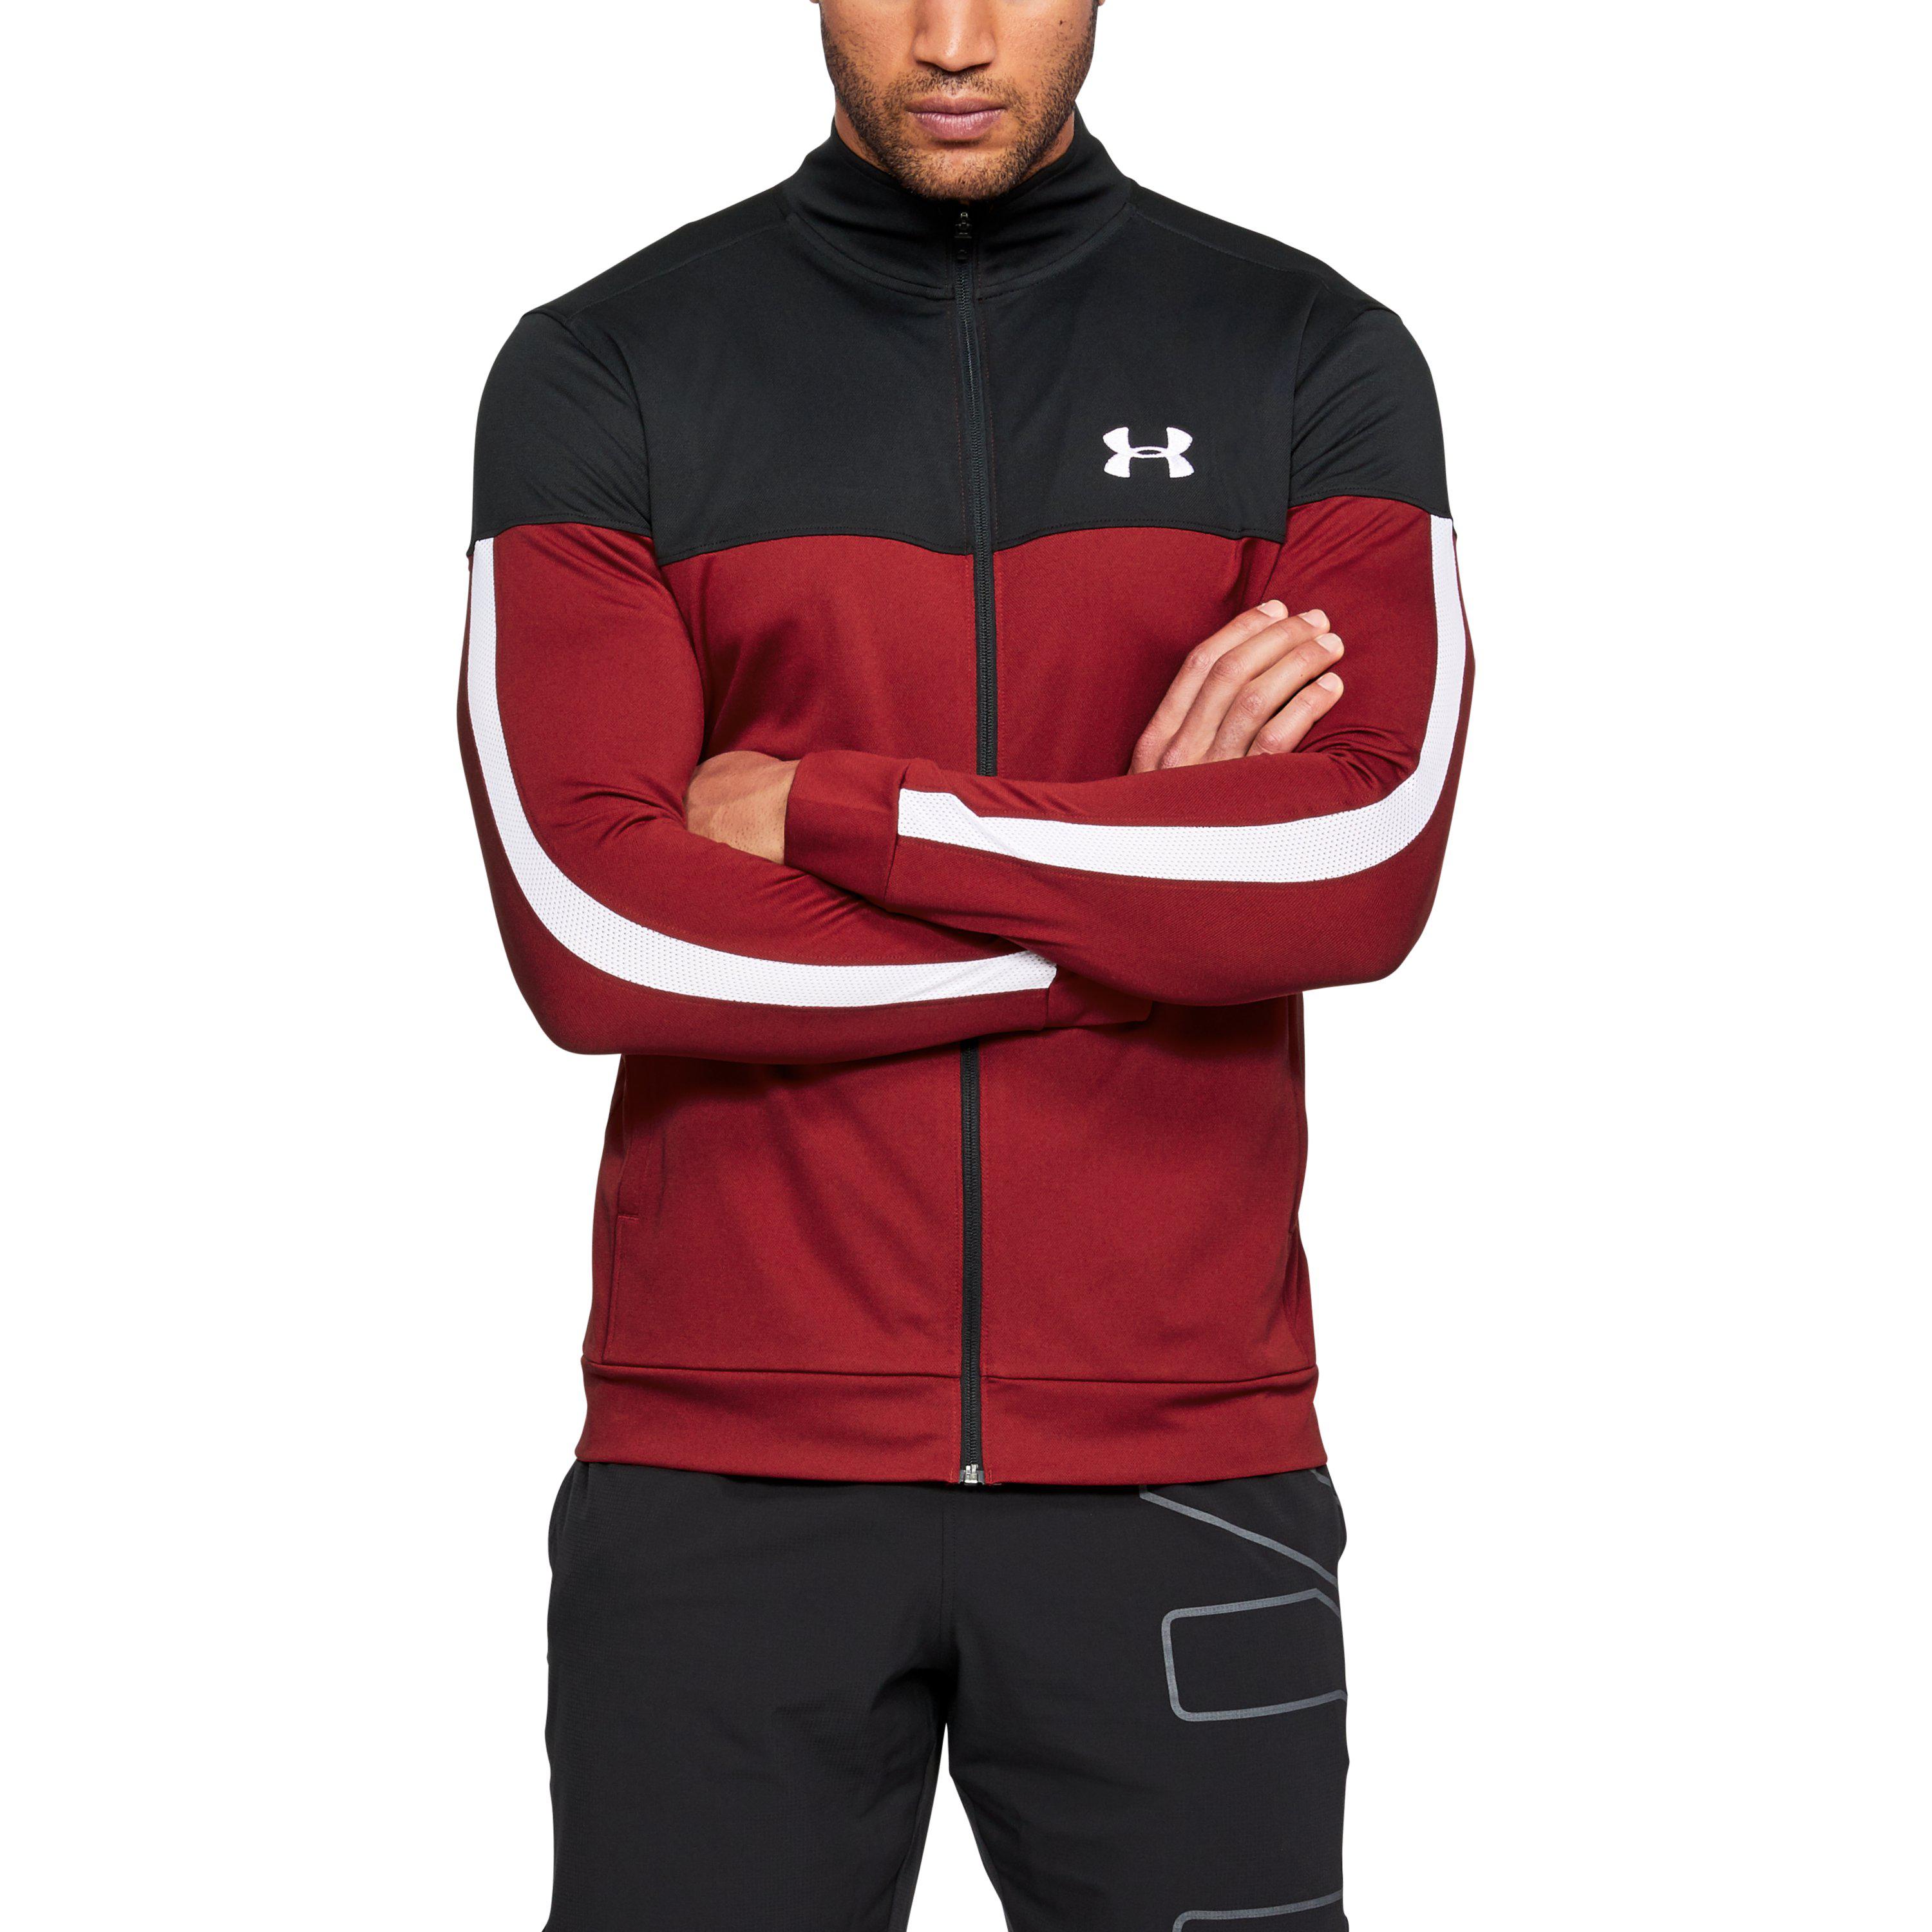 Under Armour Men's Ua Sportstyle Pique Jacket in Red for Men - Lyst